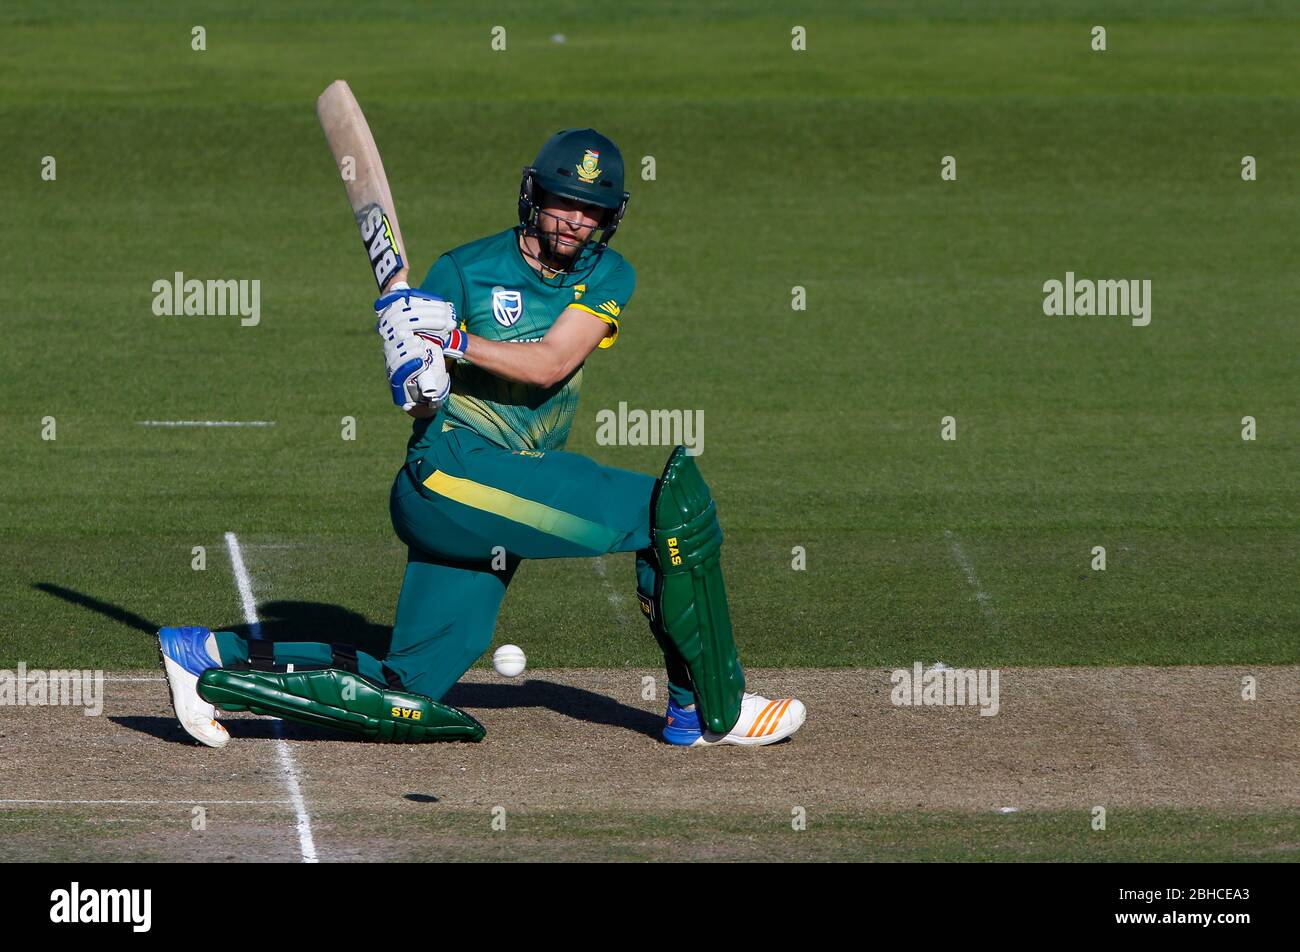 Wayne Parnell of South Africa batting during the Tour Match between Sussex and South Africa at The 1st Central County Ground in Hove. 19 May 2017 Stock Photo